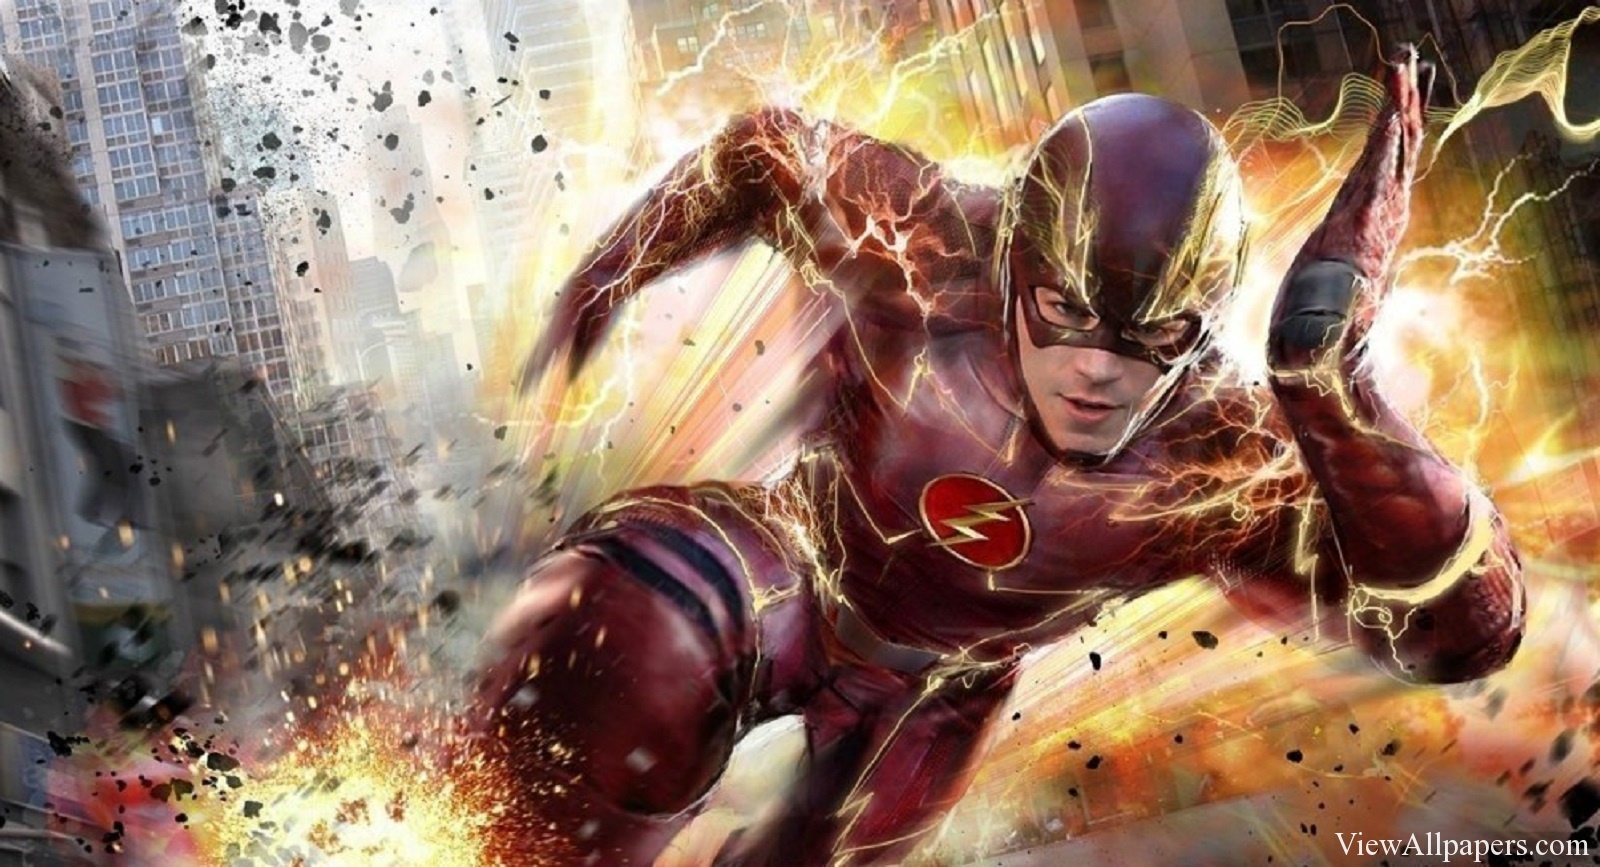 The Flash Television Show High Resolution Wallpaper Free download The